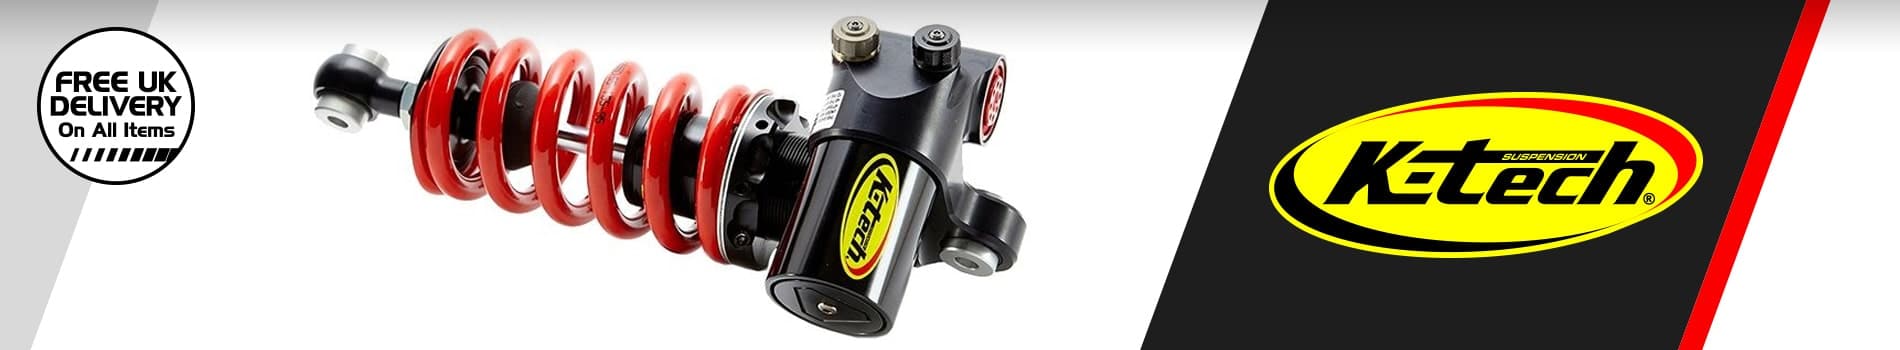 K Tech Suspension - Free UK Delivery